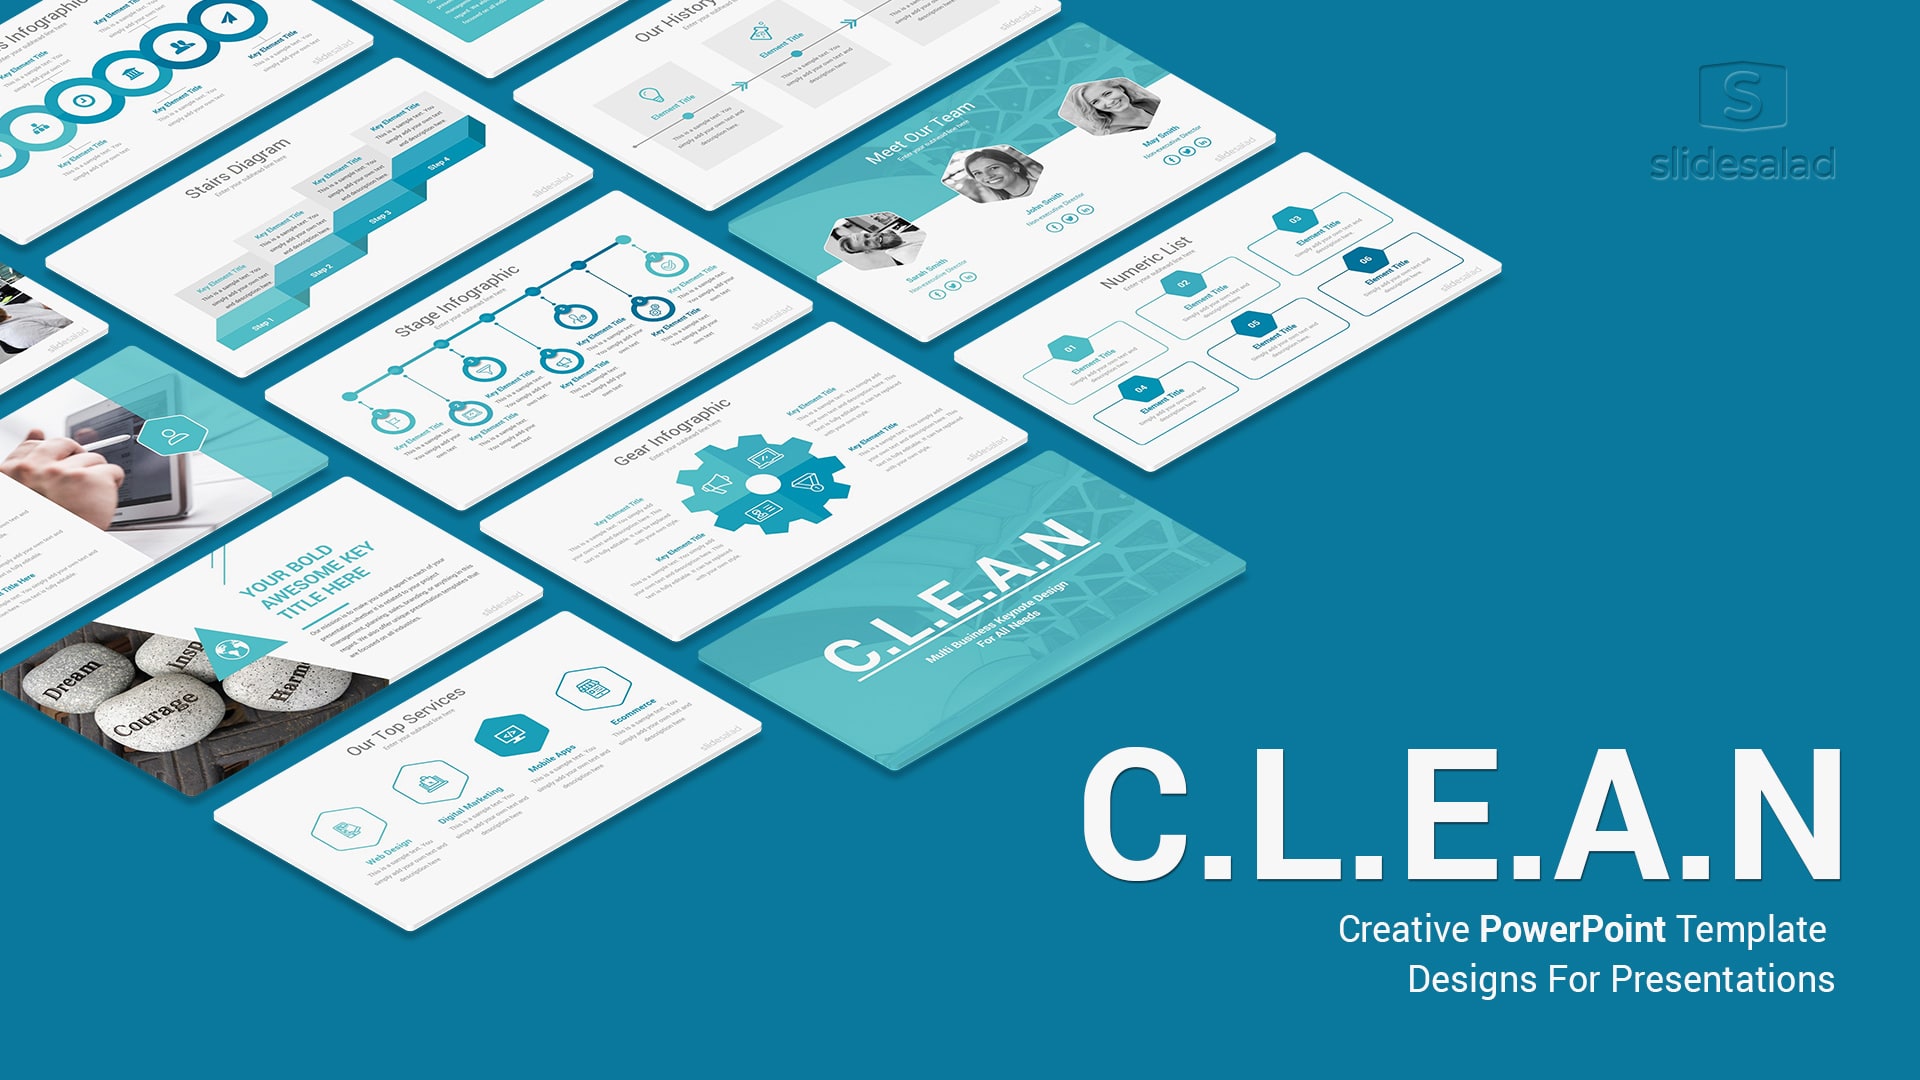 Clean Minimal Business PowerPoint Templates For Presentations